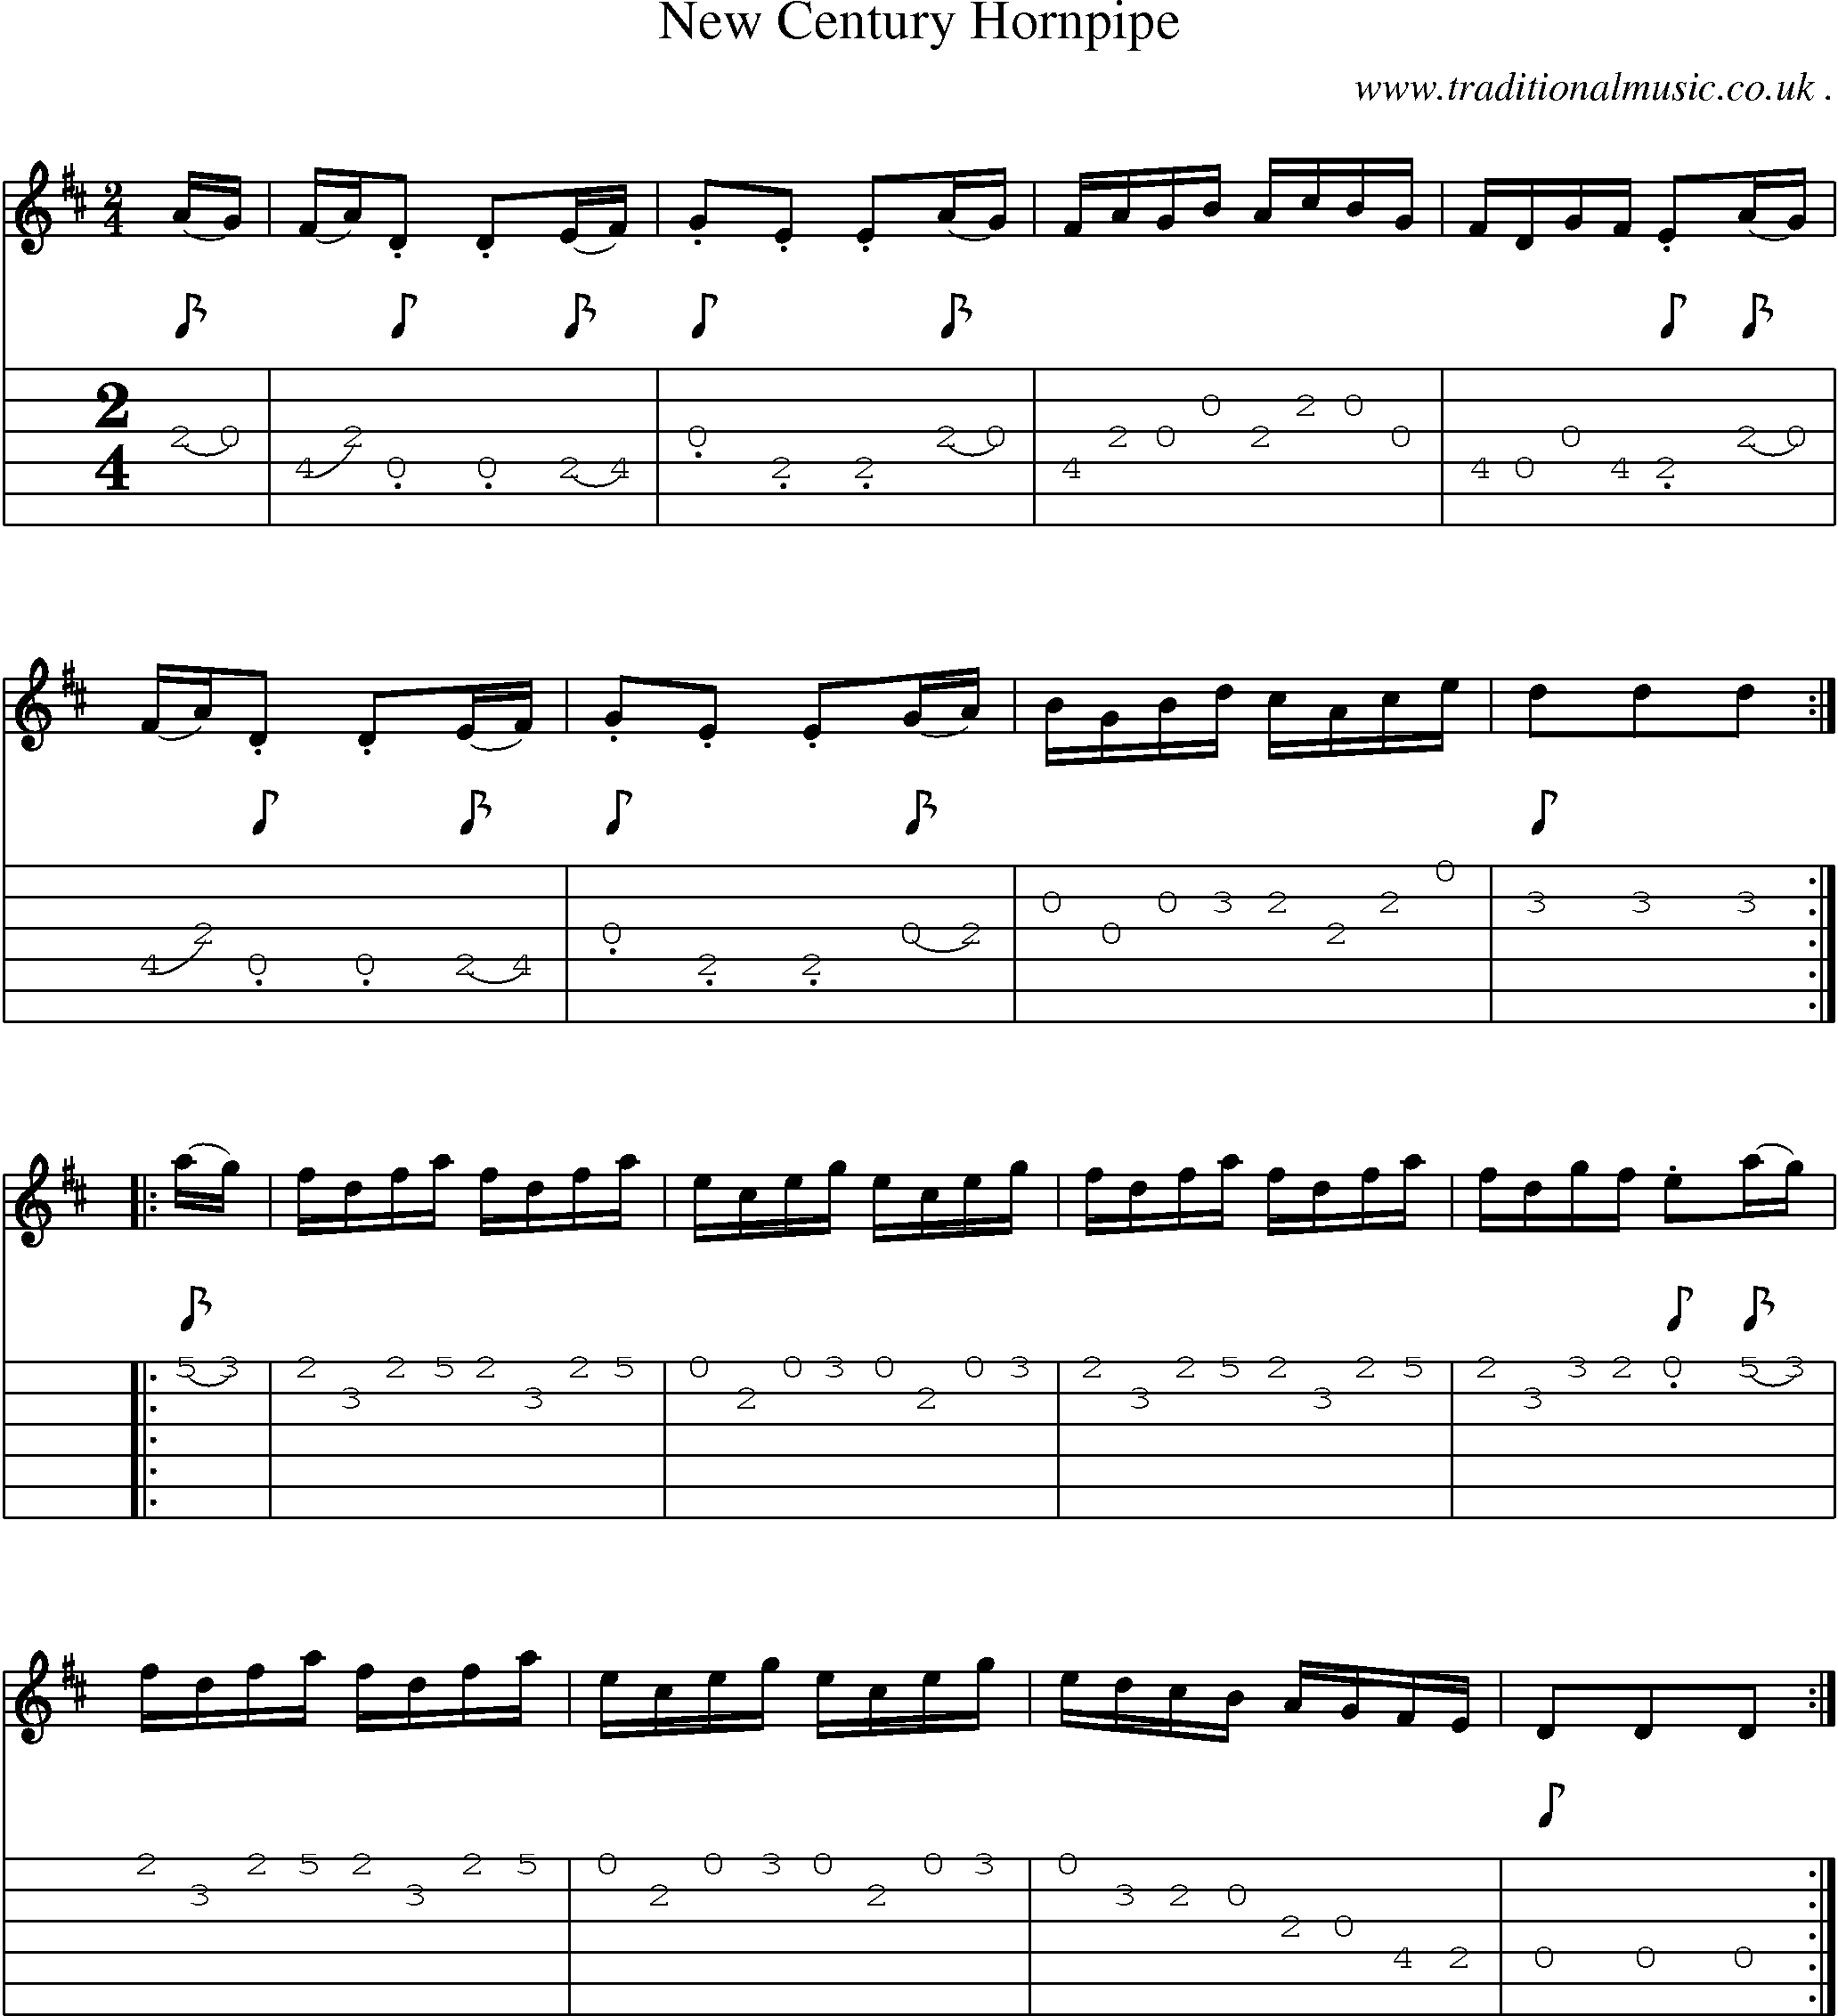 Sheet-Music and Guitar Tabs for New Century Hornpipe